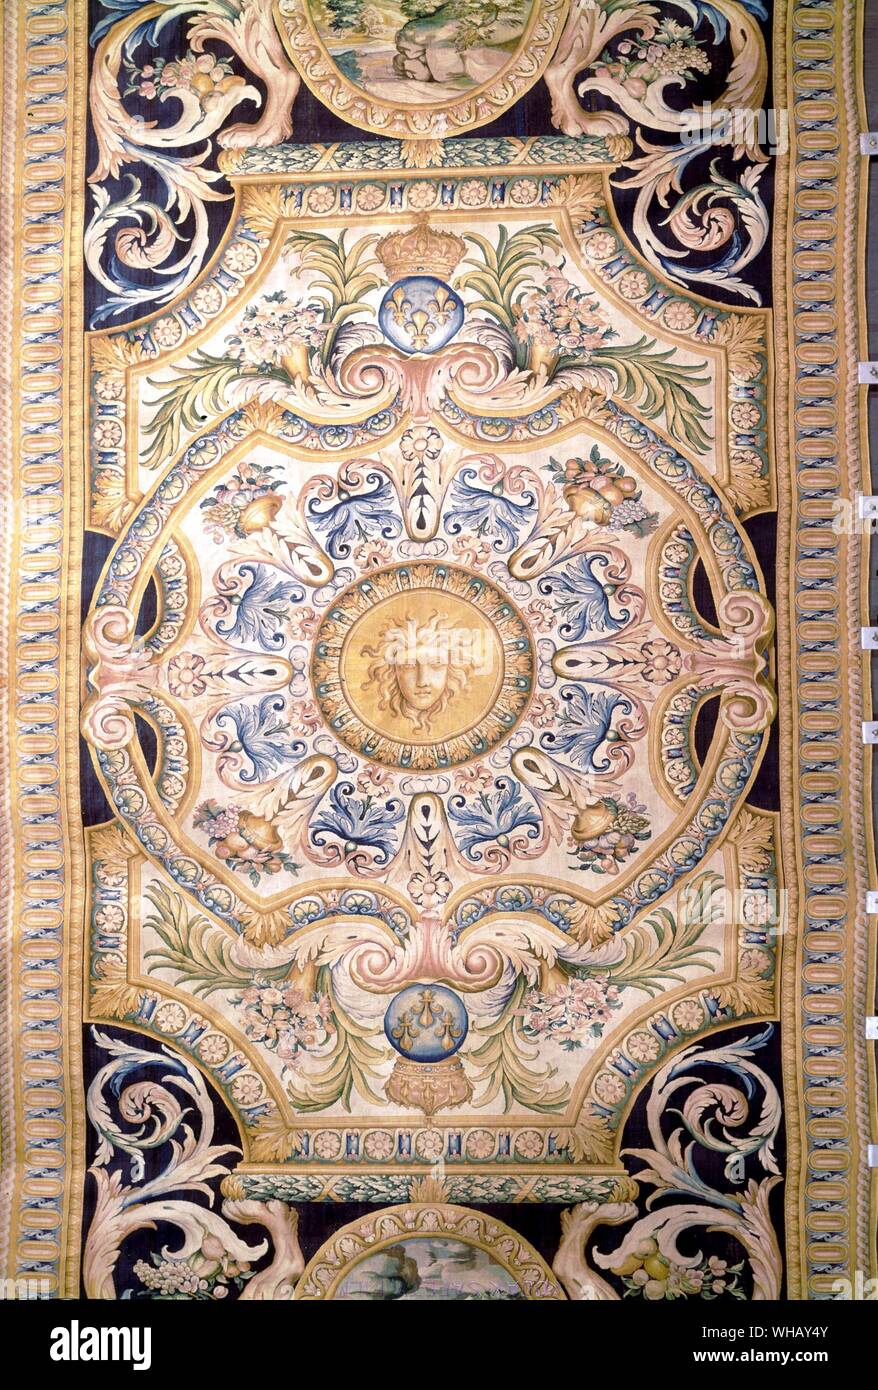 Detail from a Savonnerie carpet for the Grande Galerie of the Louvre, Paris, France. The Sun King by Nancy Mitford, page 113.. In 1608 Henry IV initiated the French production of Turkish style carpets under the direction of Pierre Dupont. This production was soon moved to the Savonnerie factory in Chaillot just west of Paris. The earliest, well-known group produced by the Savonnerie, then under the direction of Simon Lourdet, are the so-called Louis XIII carpets. This is a misnomer, however, as they were produced in the early years of Louis XIV's reign (circa 1743-1761). The designs are based Stock Photo